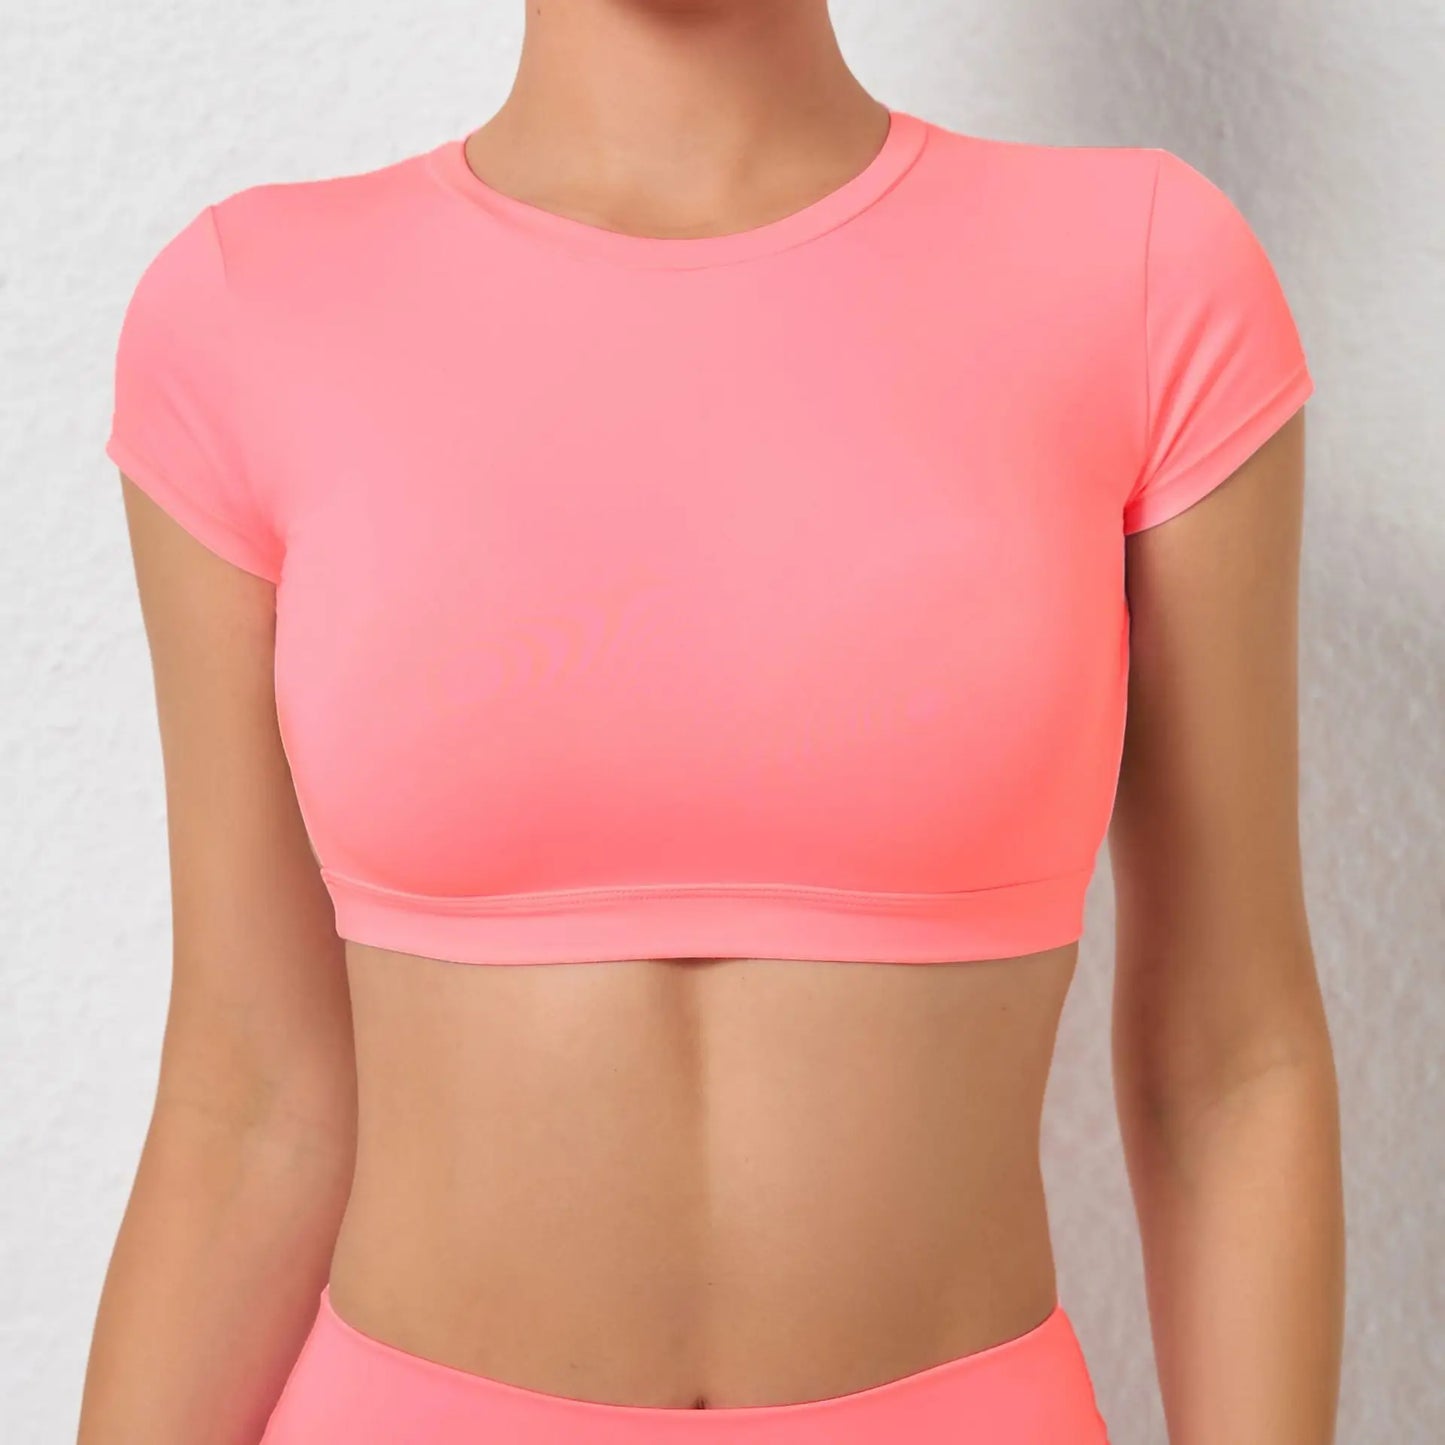 Hollow Crop Top Short Sleeve Yoga Shirt Women's Fitness Workout Tops Gym Clothes Sportswear Running T-shirts The Clothing Company Sydney